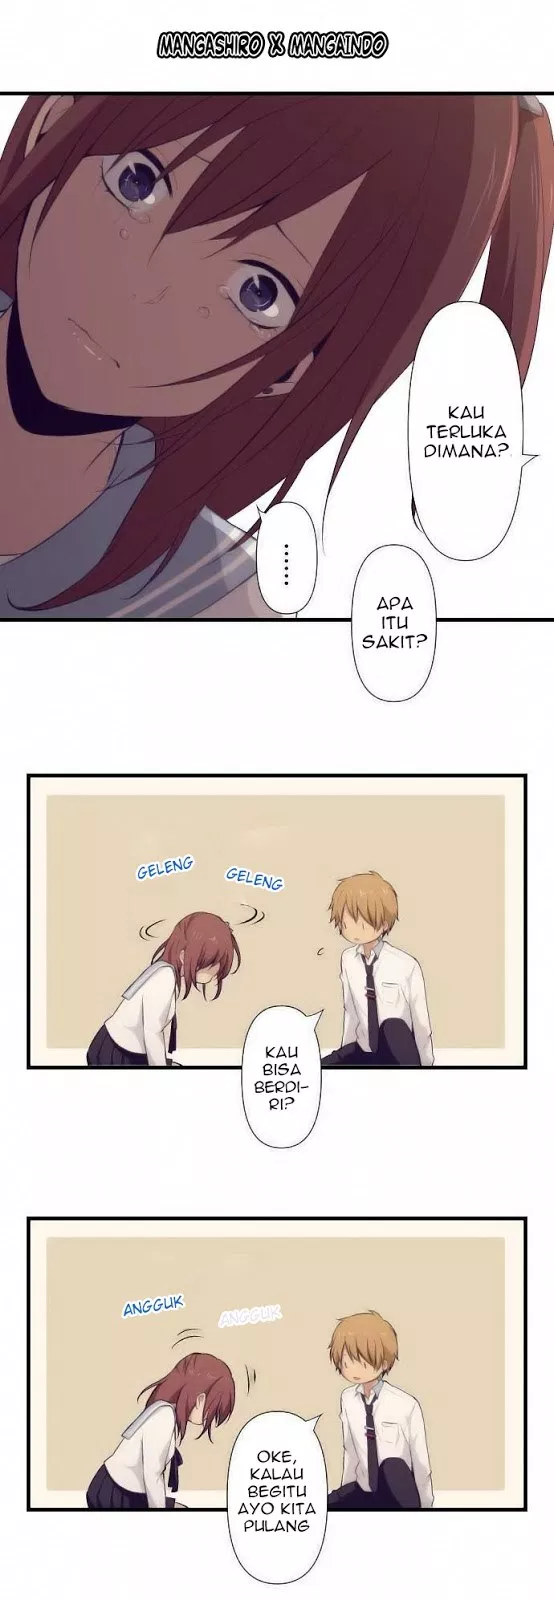 ReLIFE Chapter 68